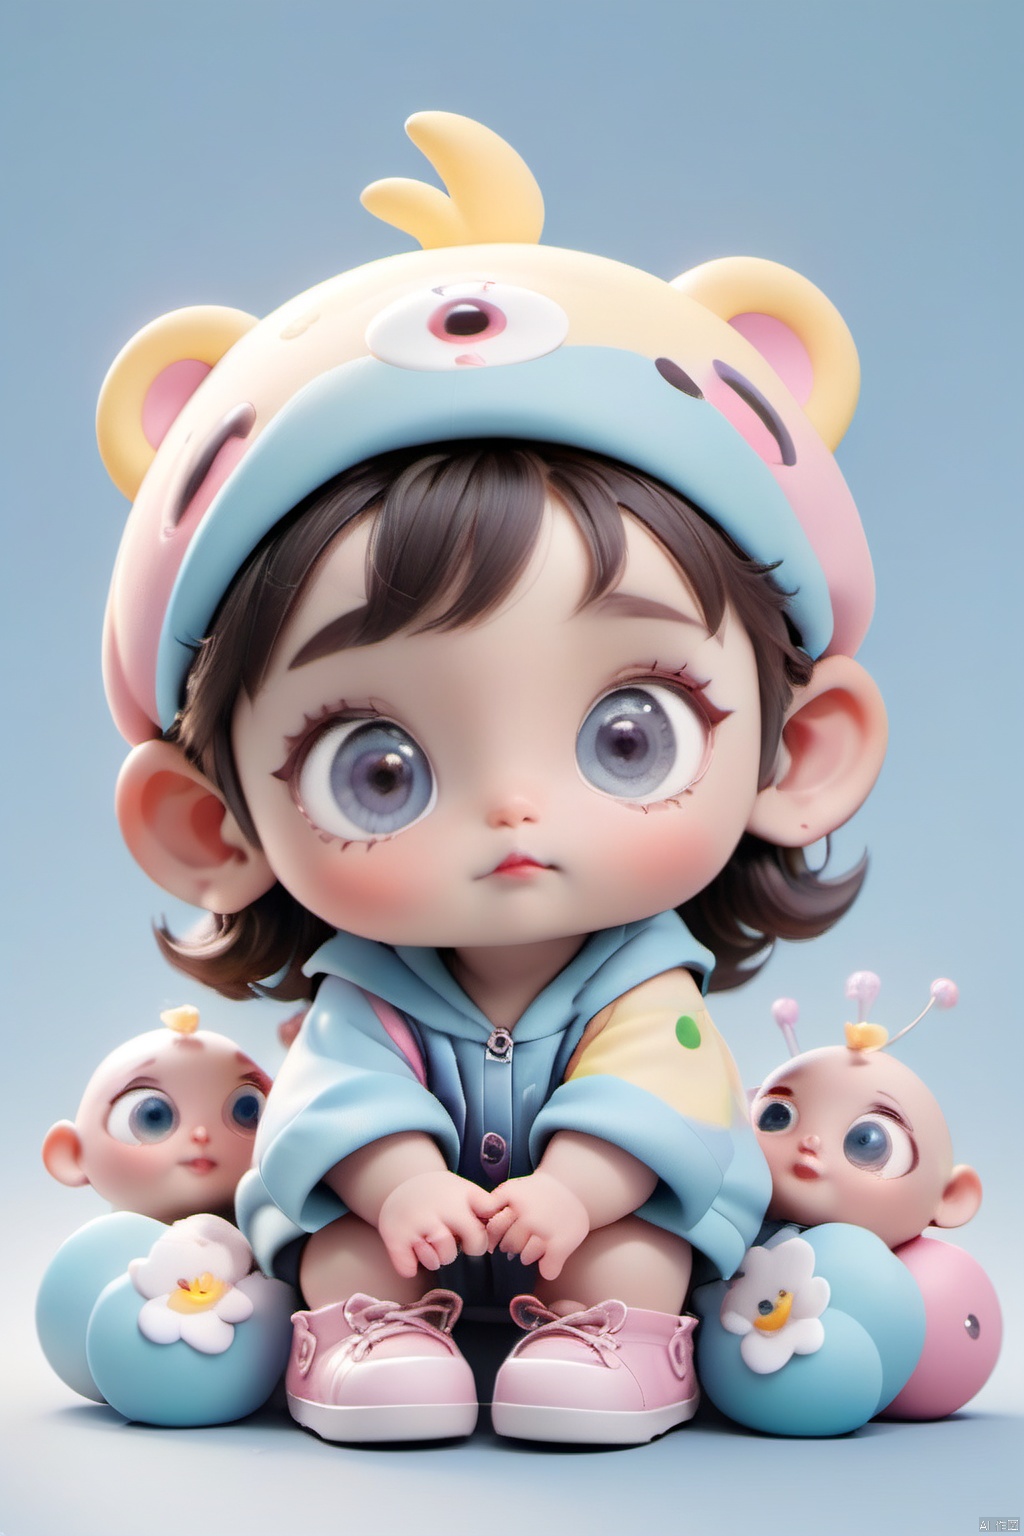  A cute and technological IP with eyes and babies as the theme
, 3d stely，colorful，